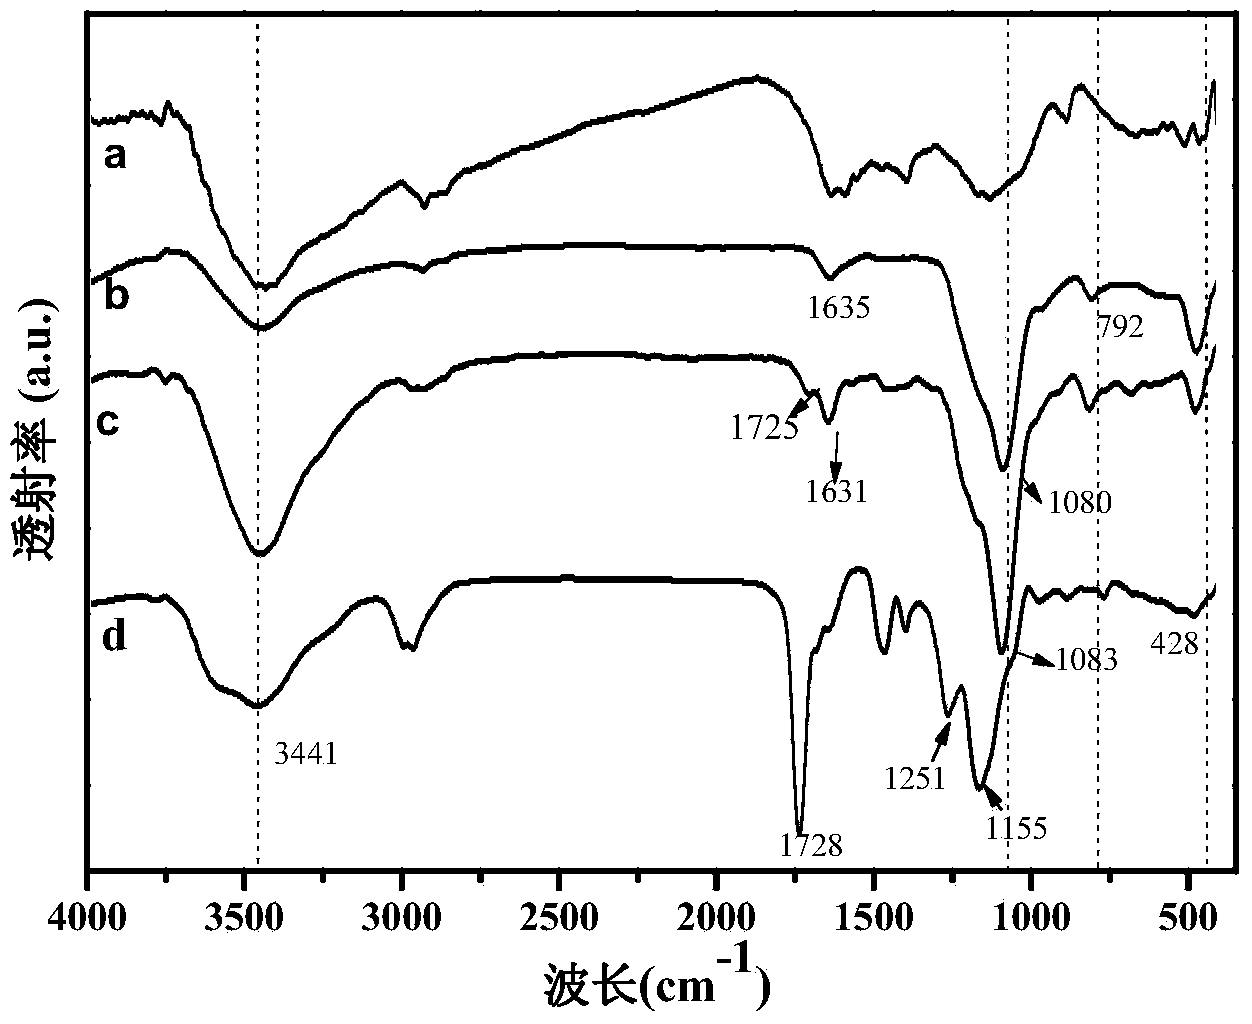 Carbon nanotube surface molecularly imprinted polymer as well as preparation method and application thereof